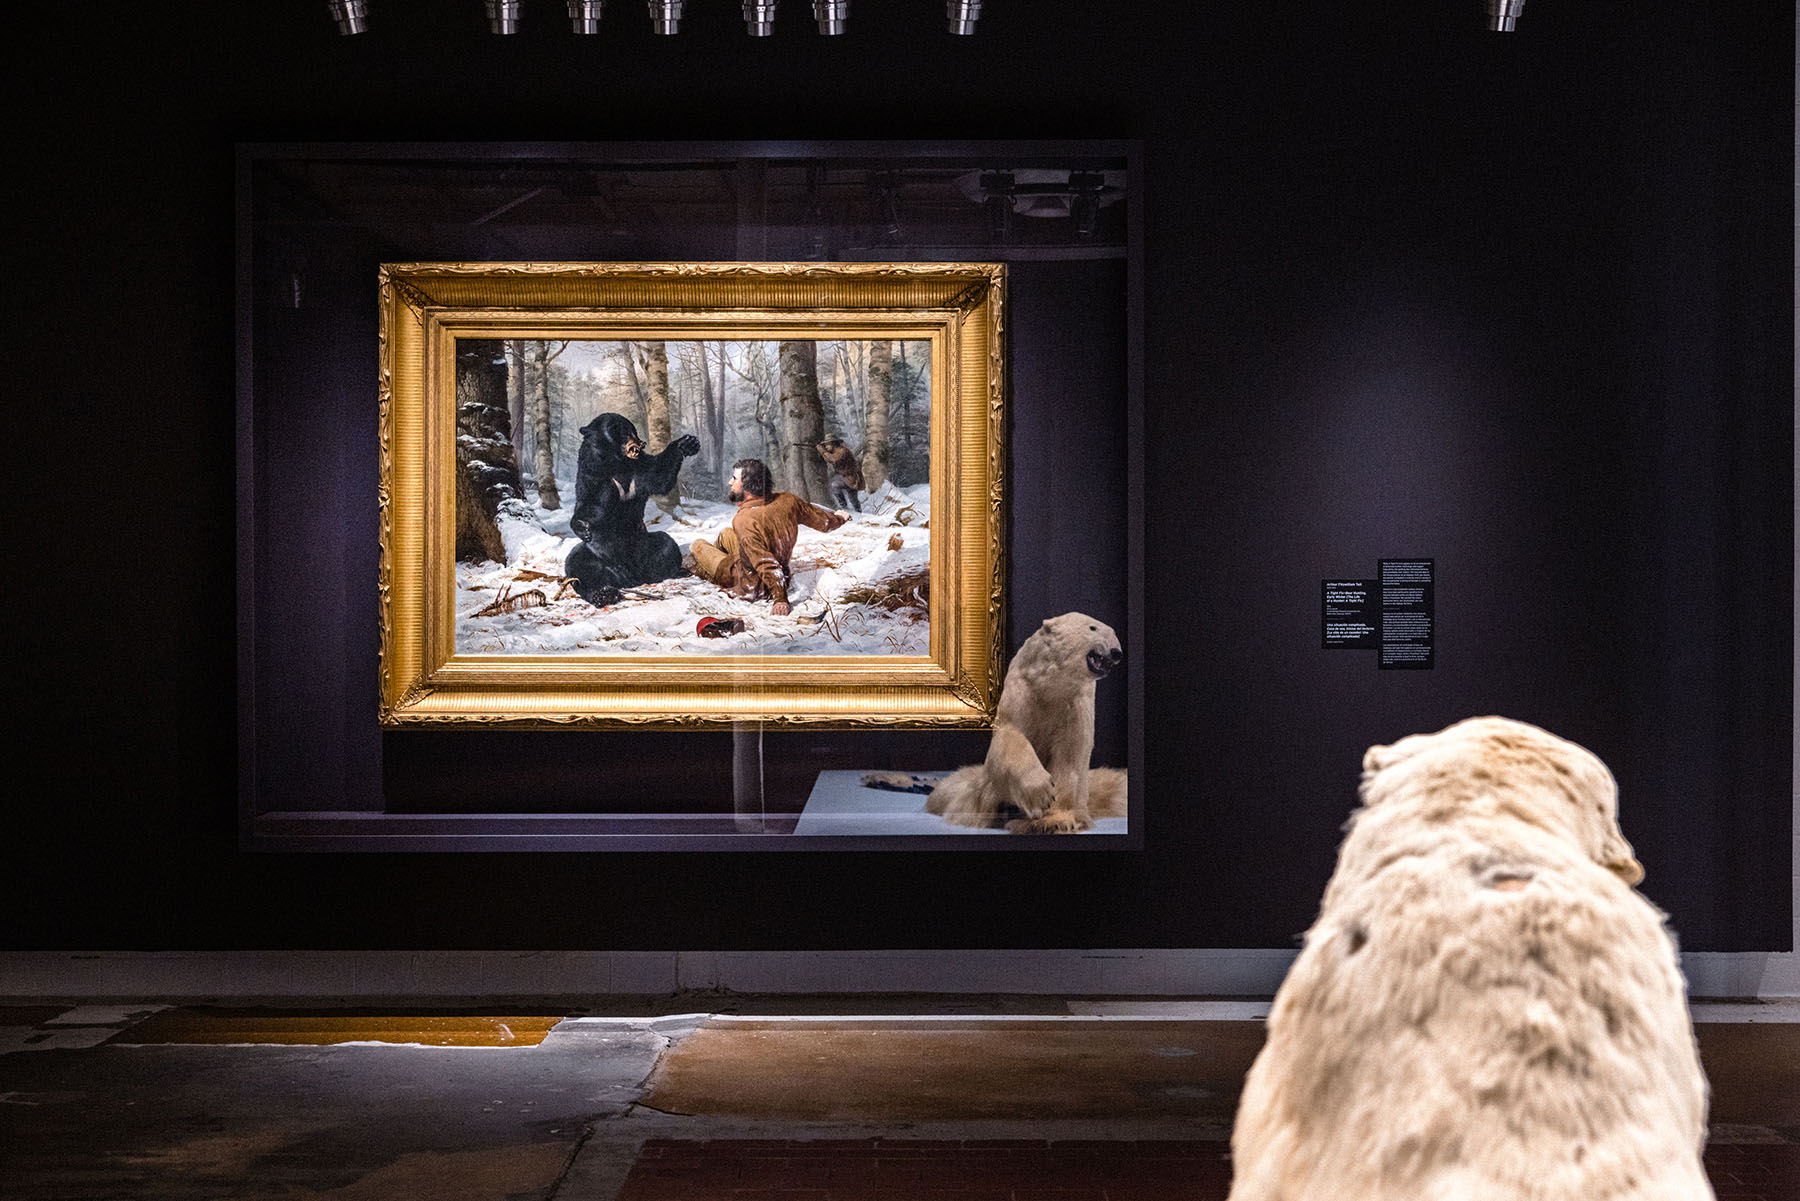 A painting of a black bear in a struggle with a white man on a snowy forest floor hangs in glass box with a taxidermy polar bear in front of the camera and reflecting off the glass.